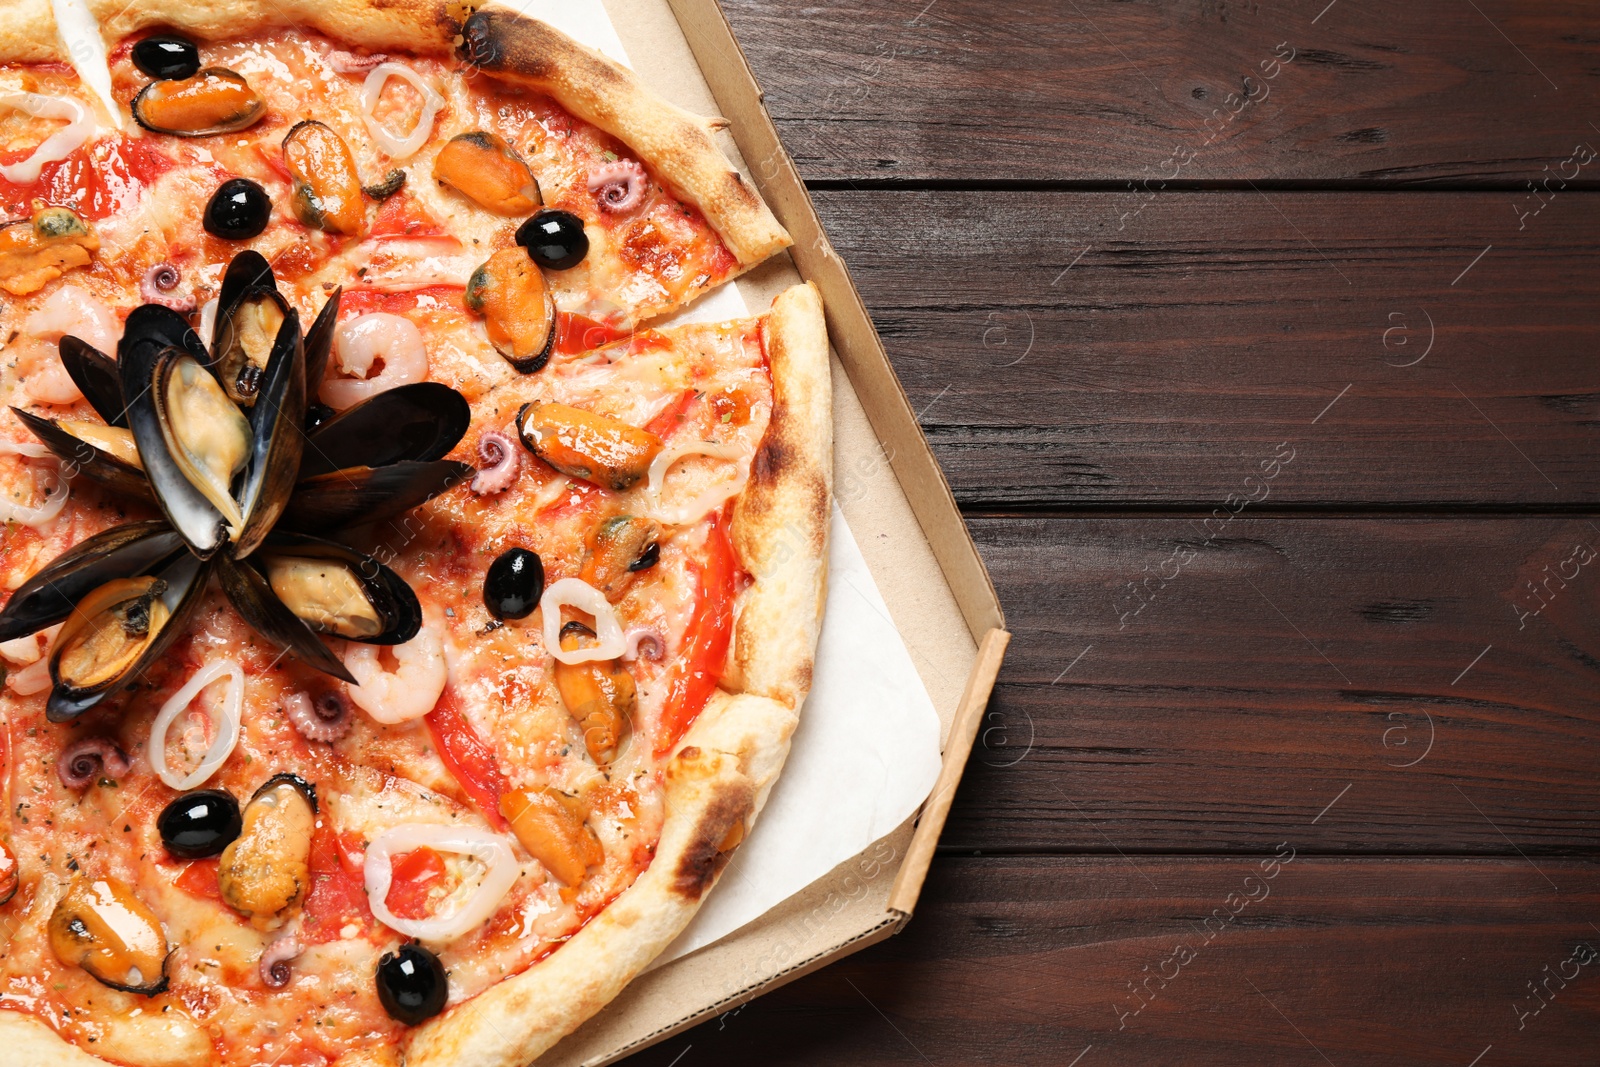 Photo of Tasty pizza with seafood on wooden table, top view. Space for text